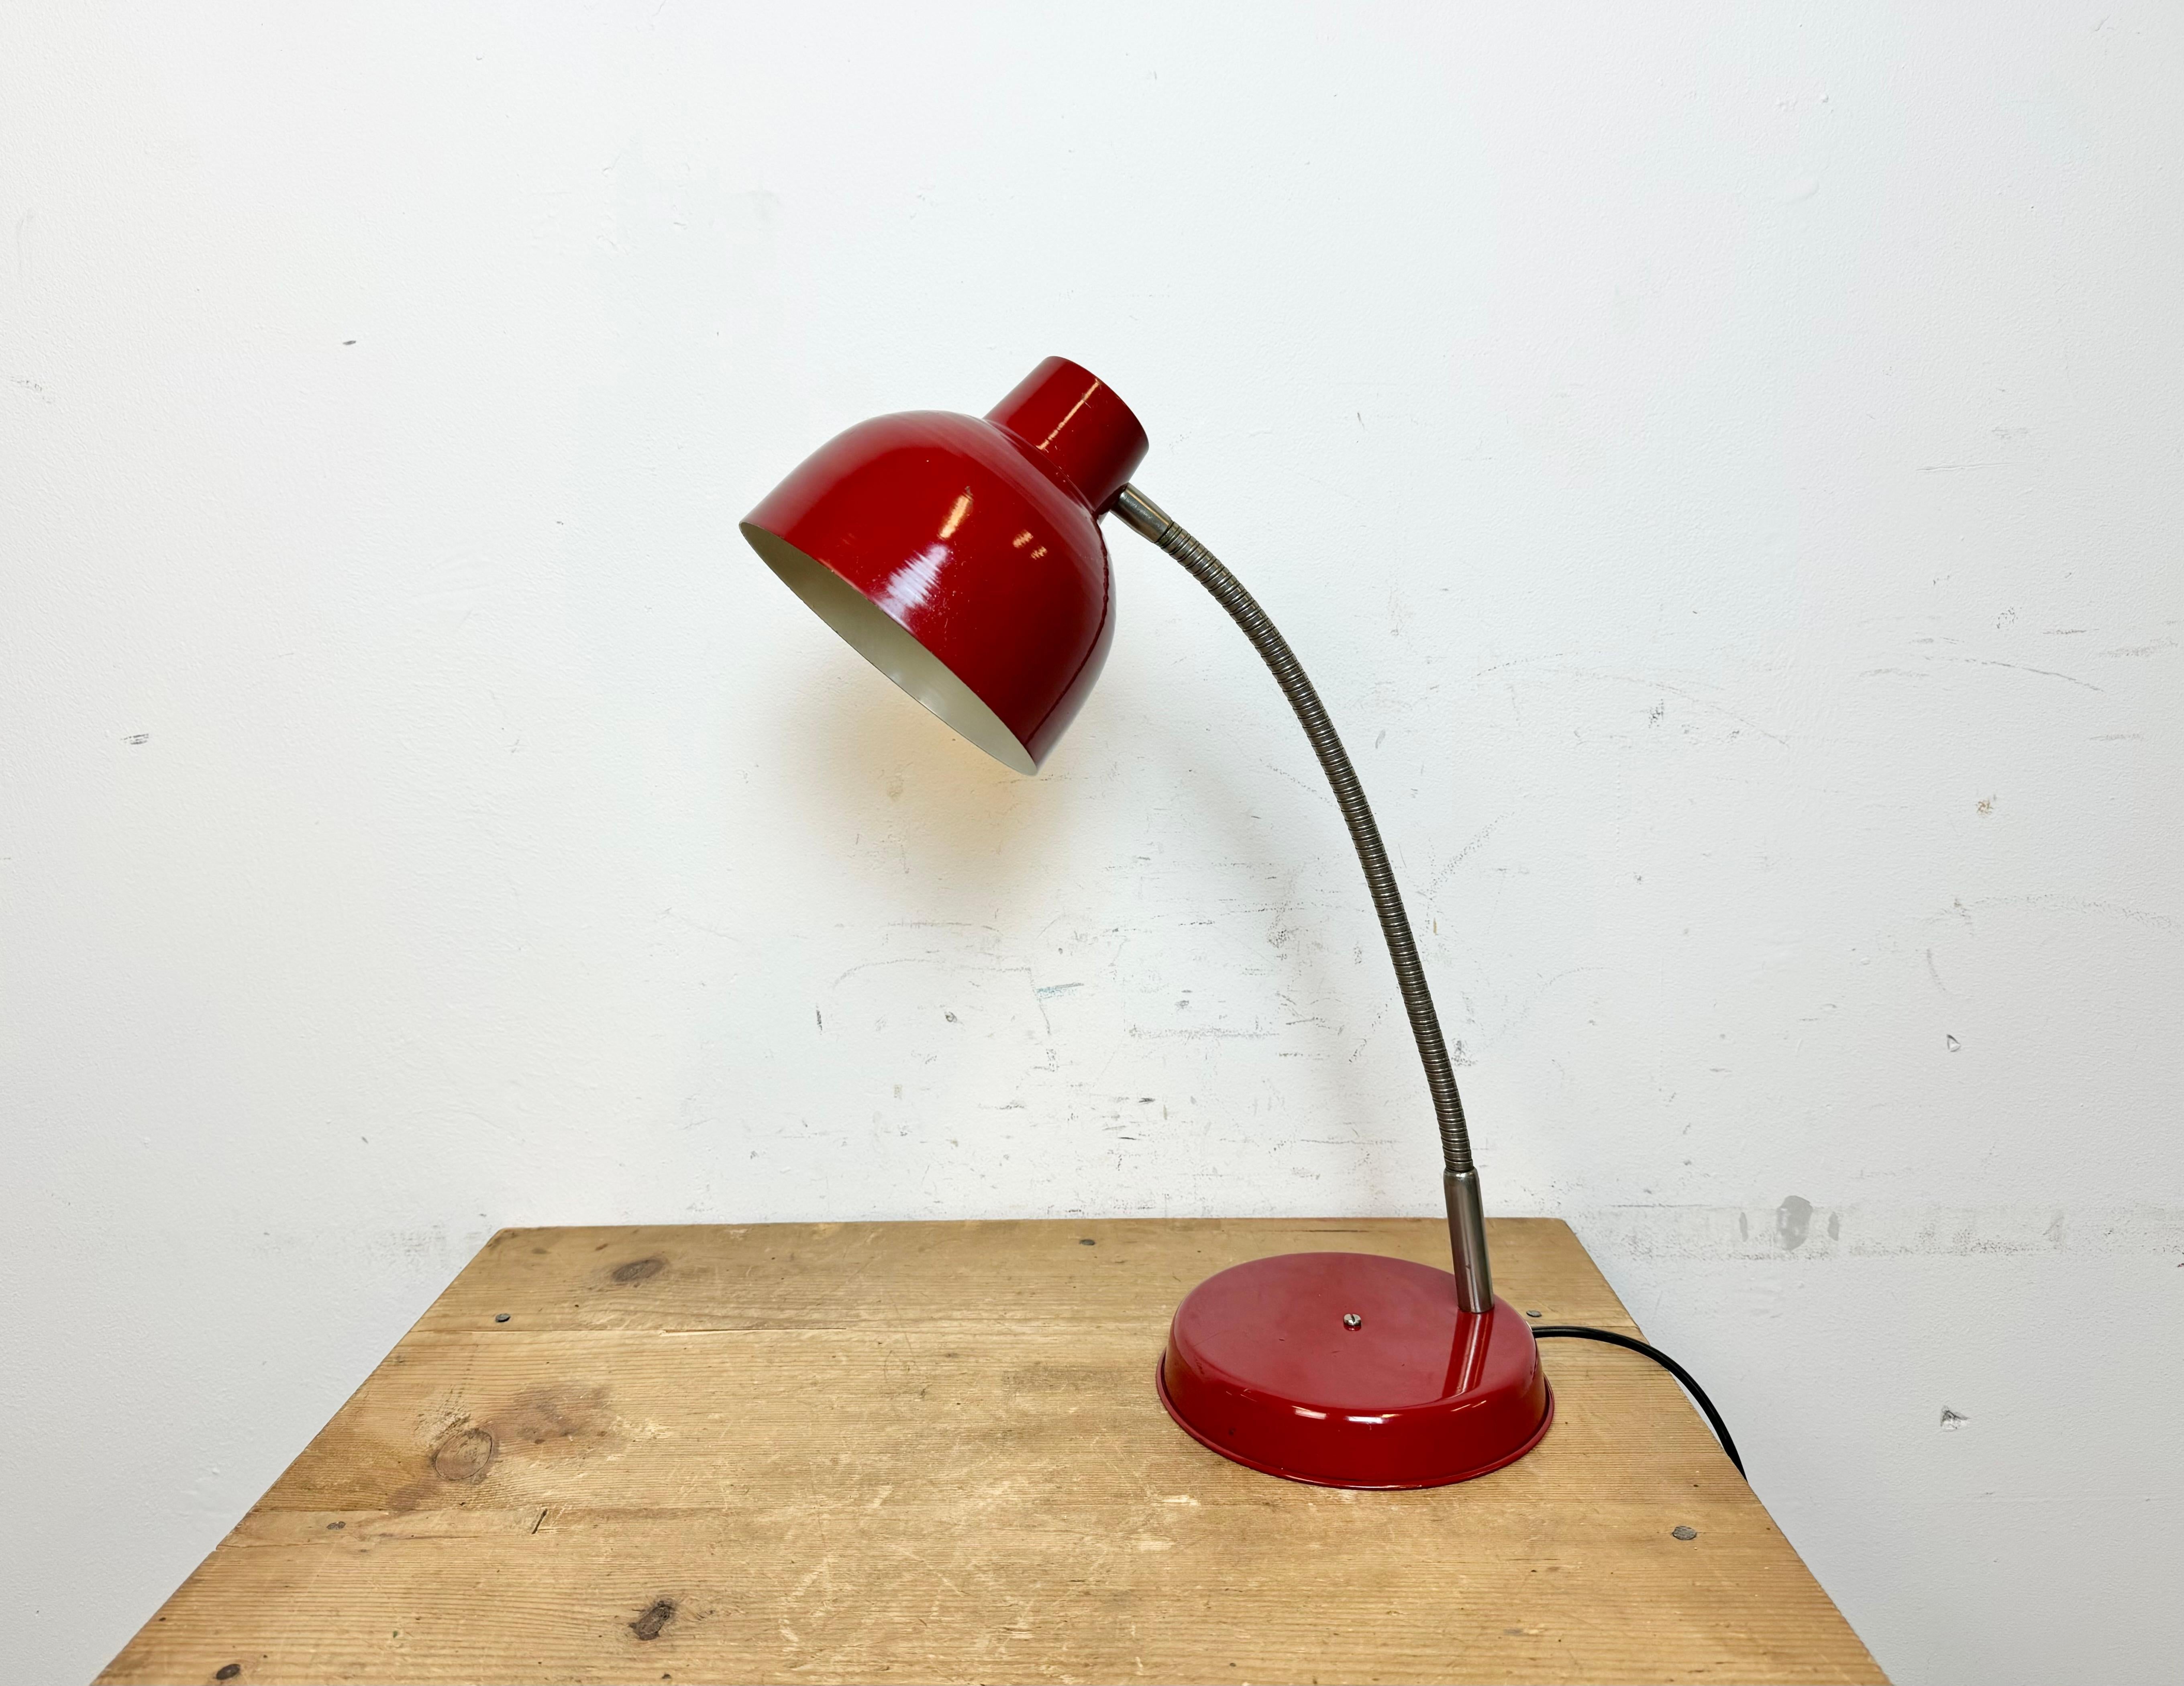 Industrial workshop table lamp made by SRSE in Poland during the 1960s.It features a red metal base and shade and a  chrome plated gooseneck. The original socket requires E27/E26 lightbulbs.
The diameter of the shade is 15 cm. The weight of the lamp